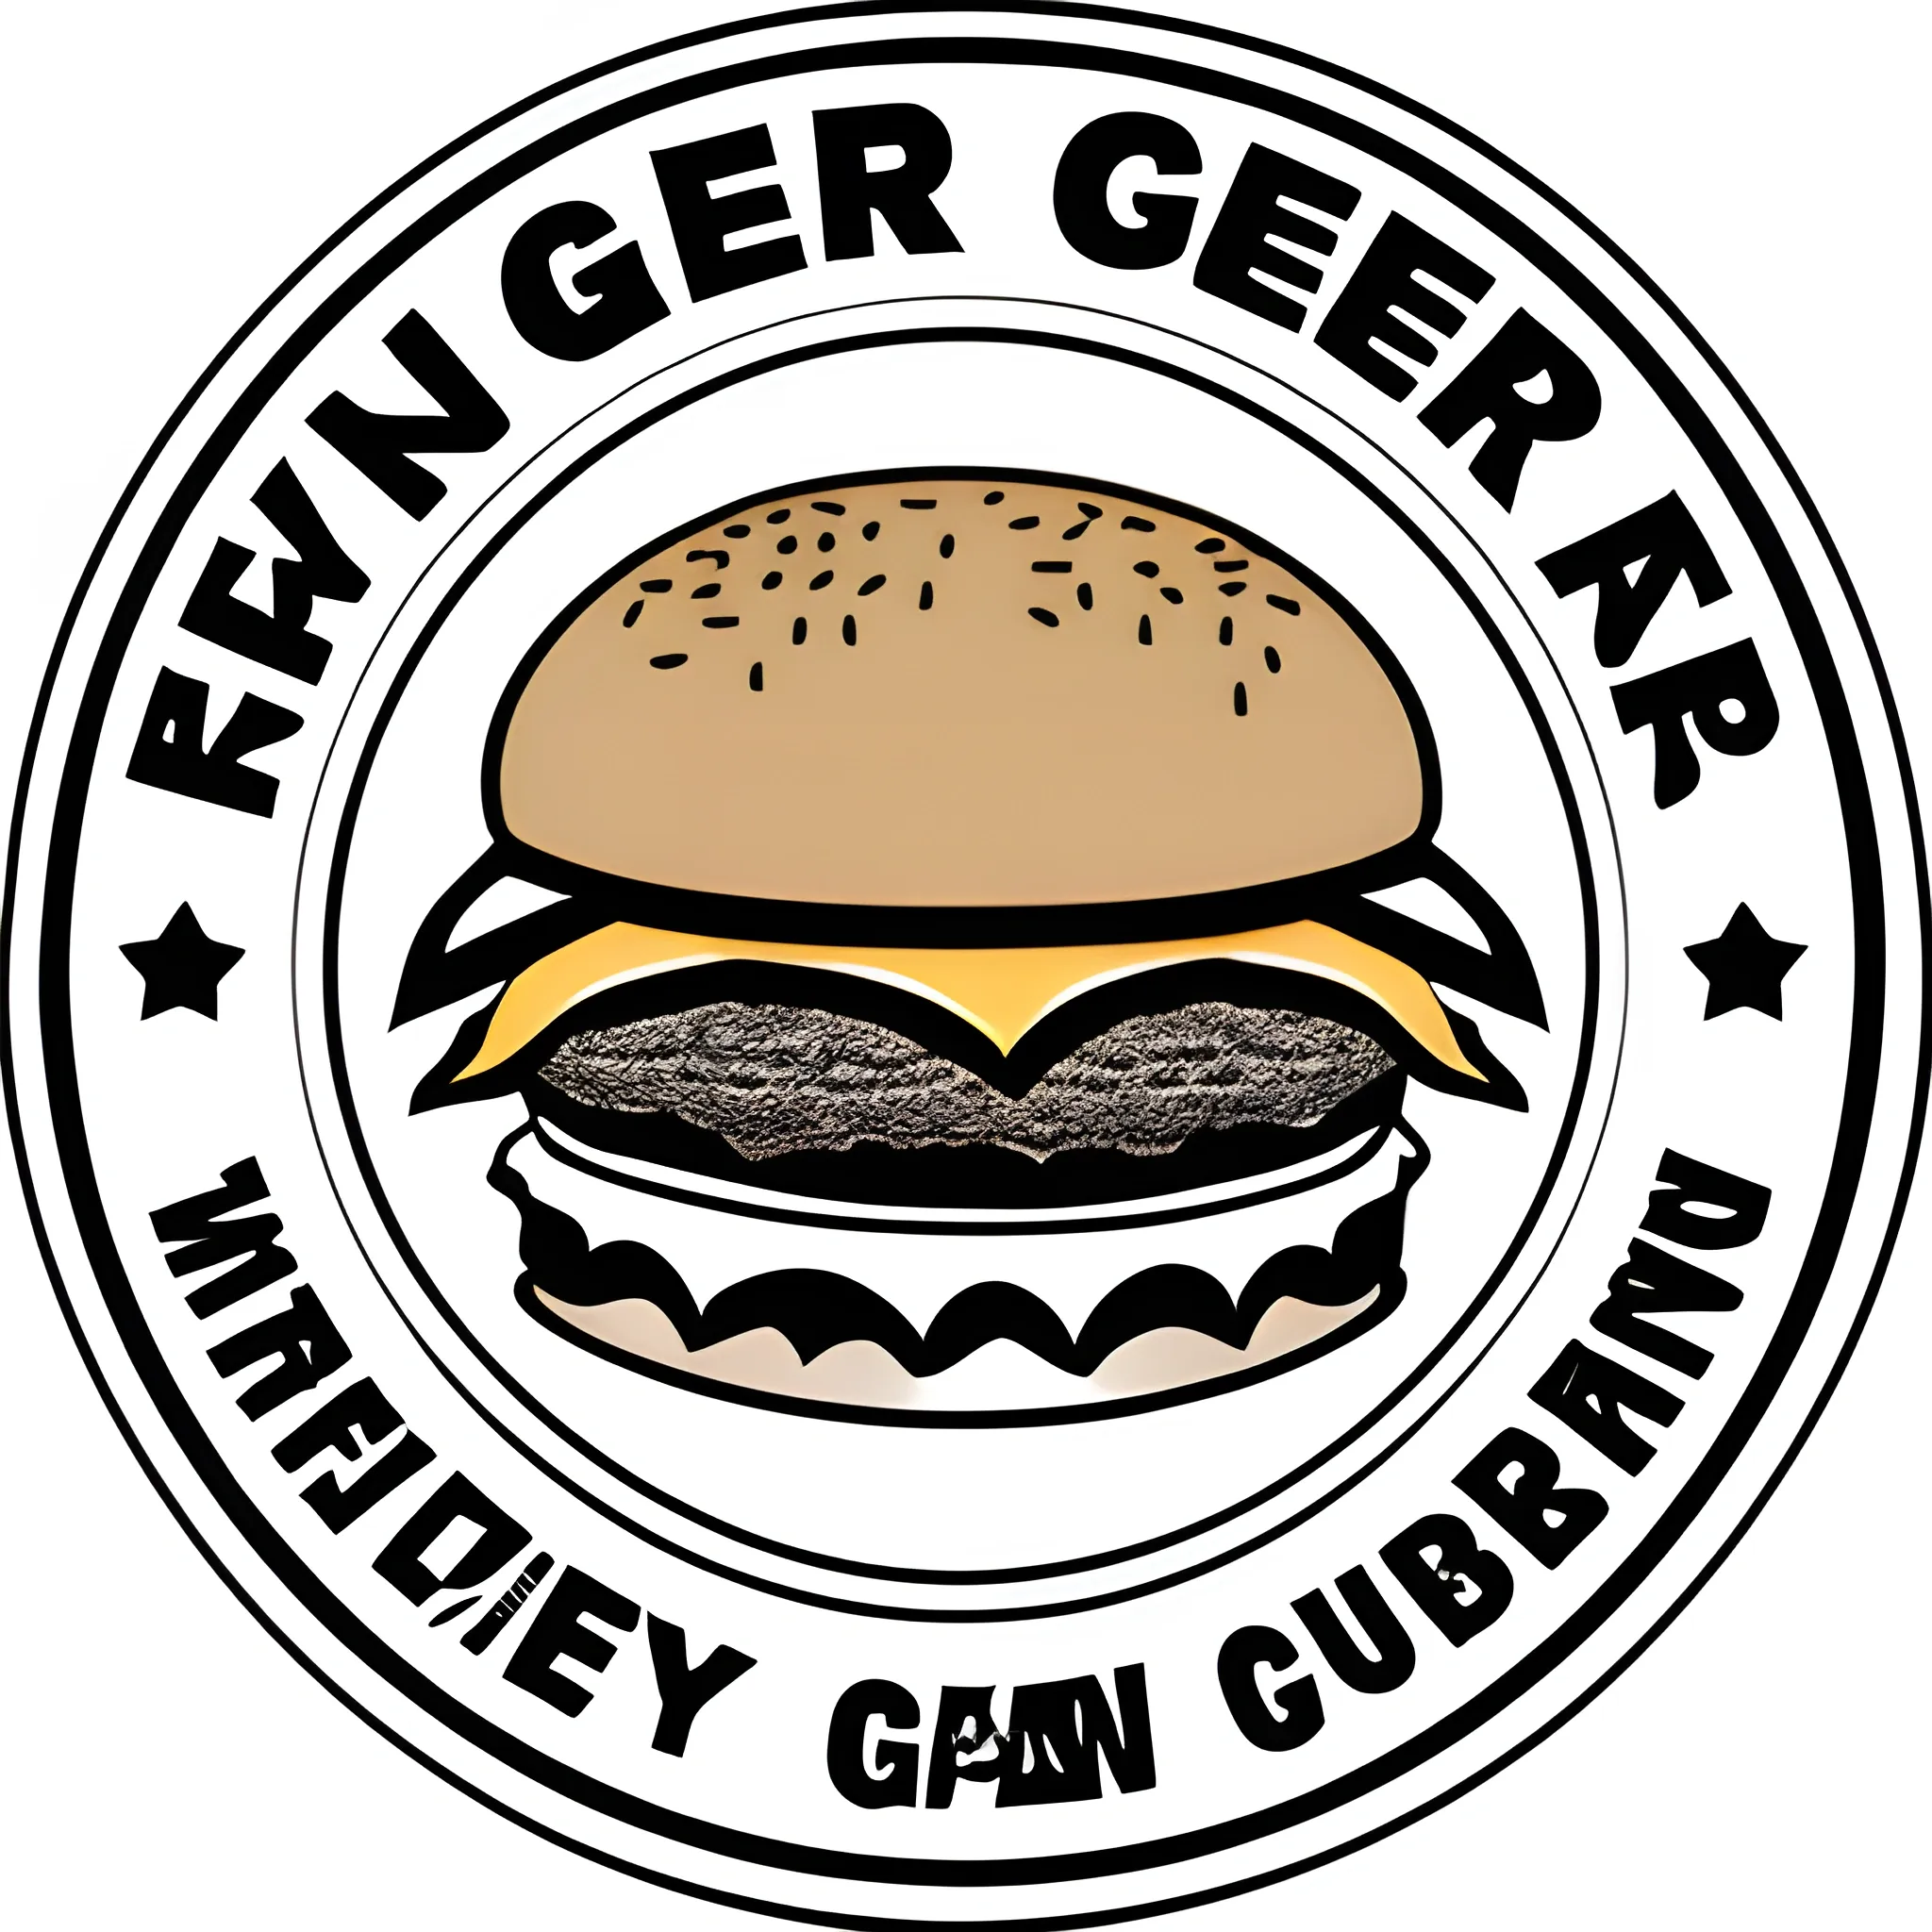 burger chef grizzly logo